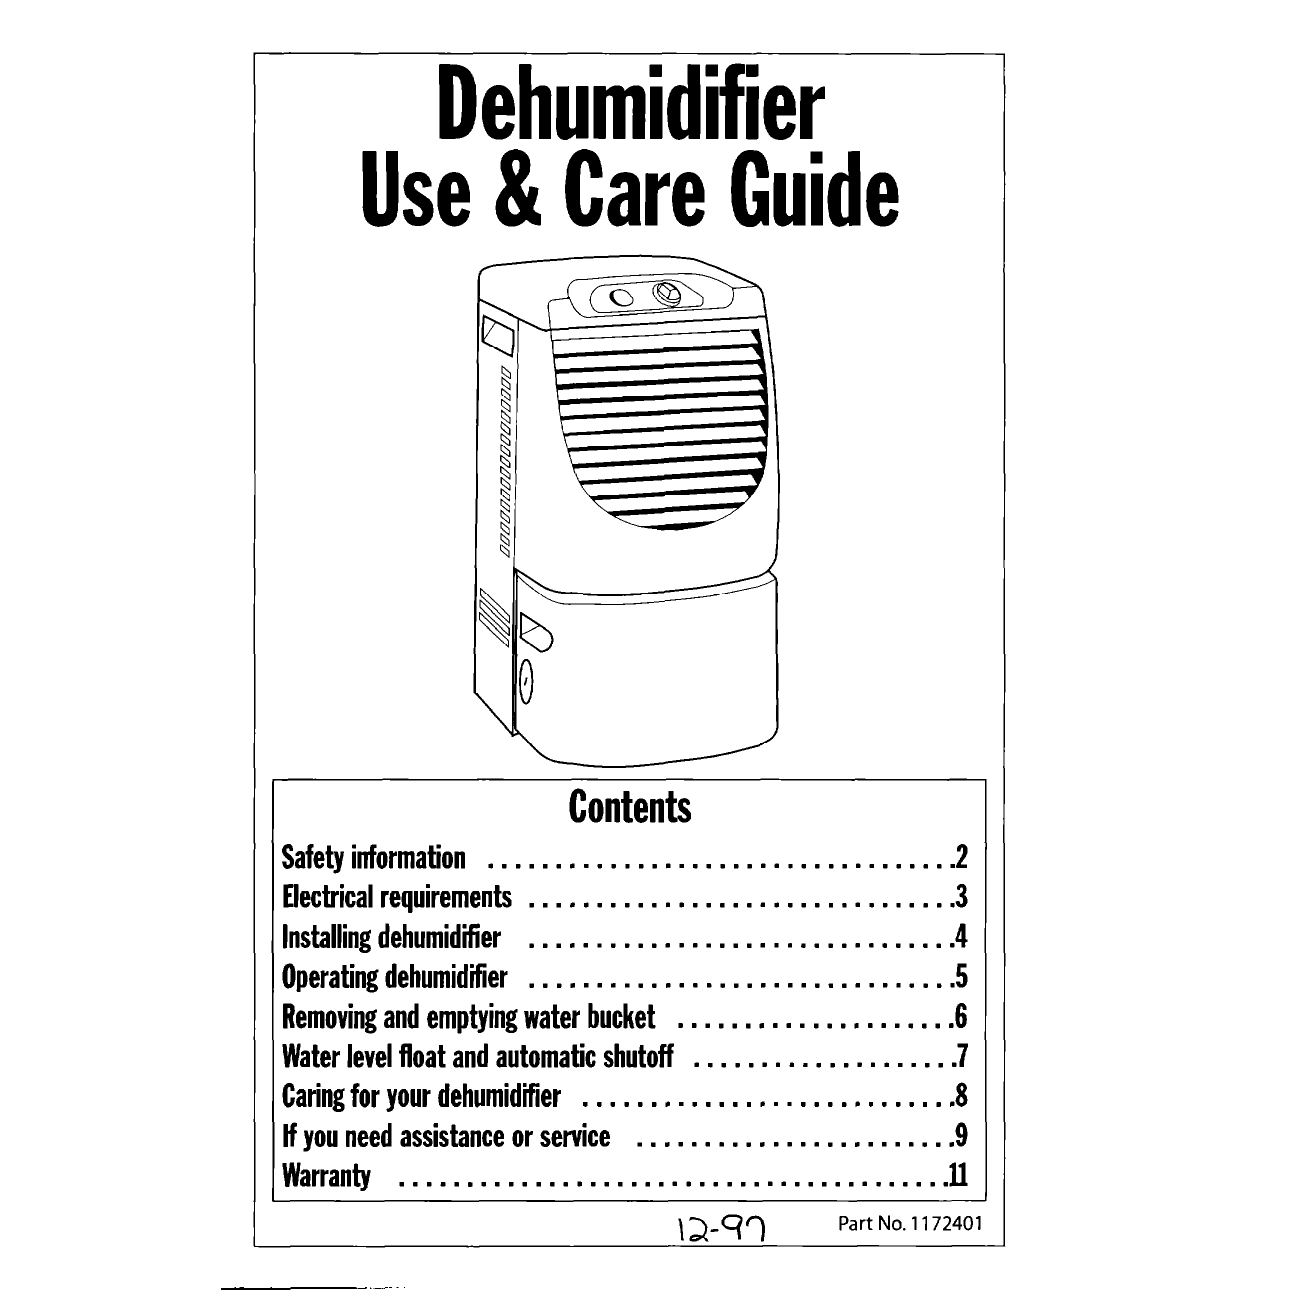 whirlpool dehumidifier stopped working